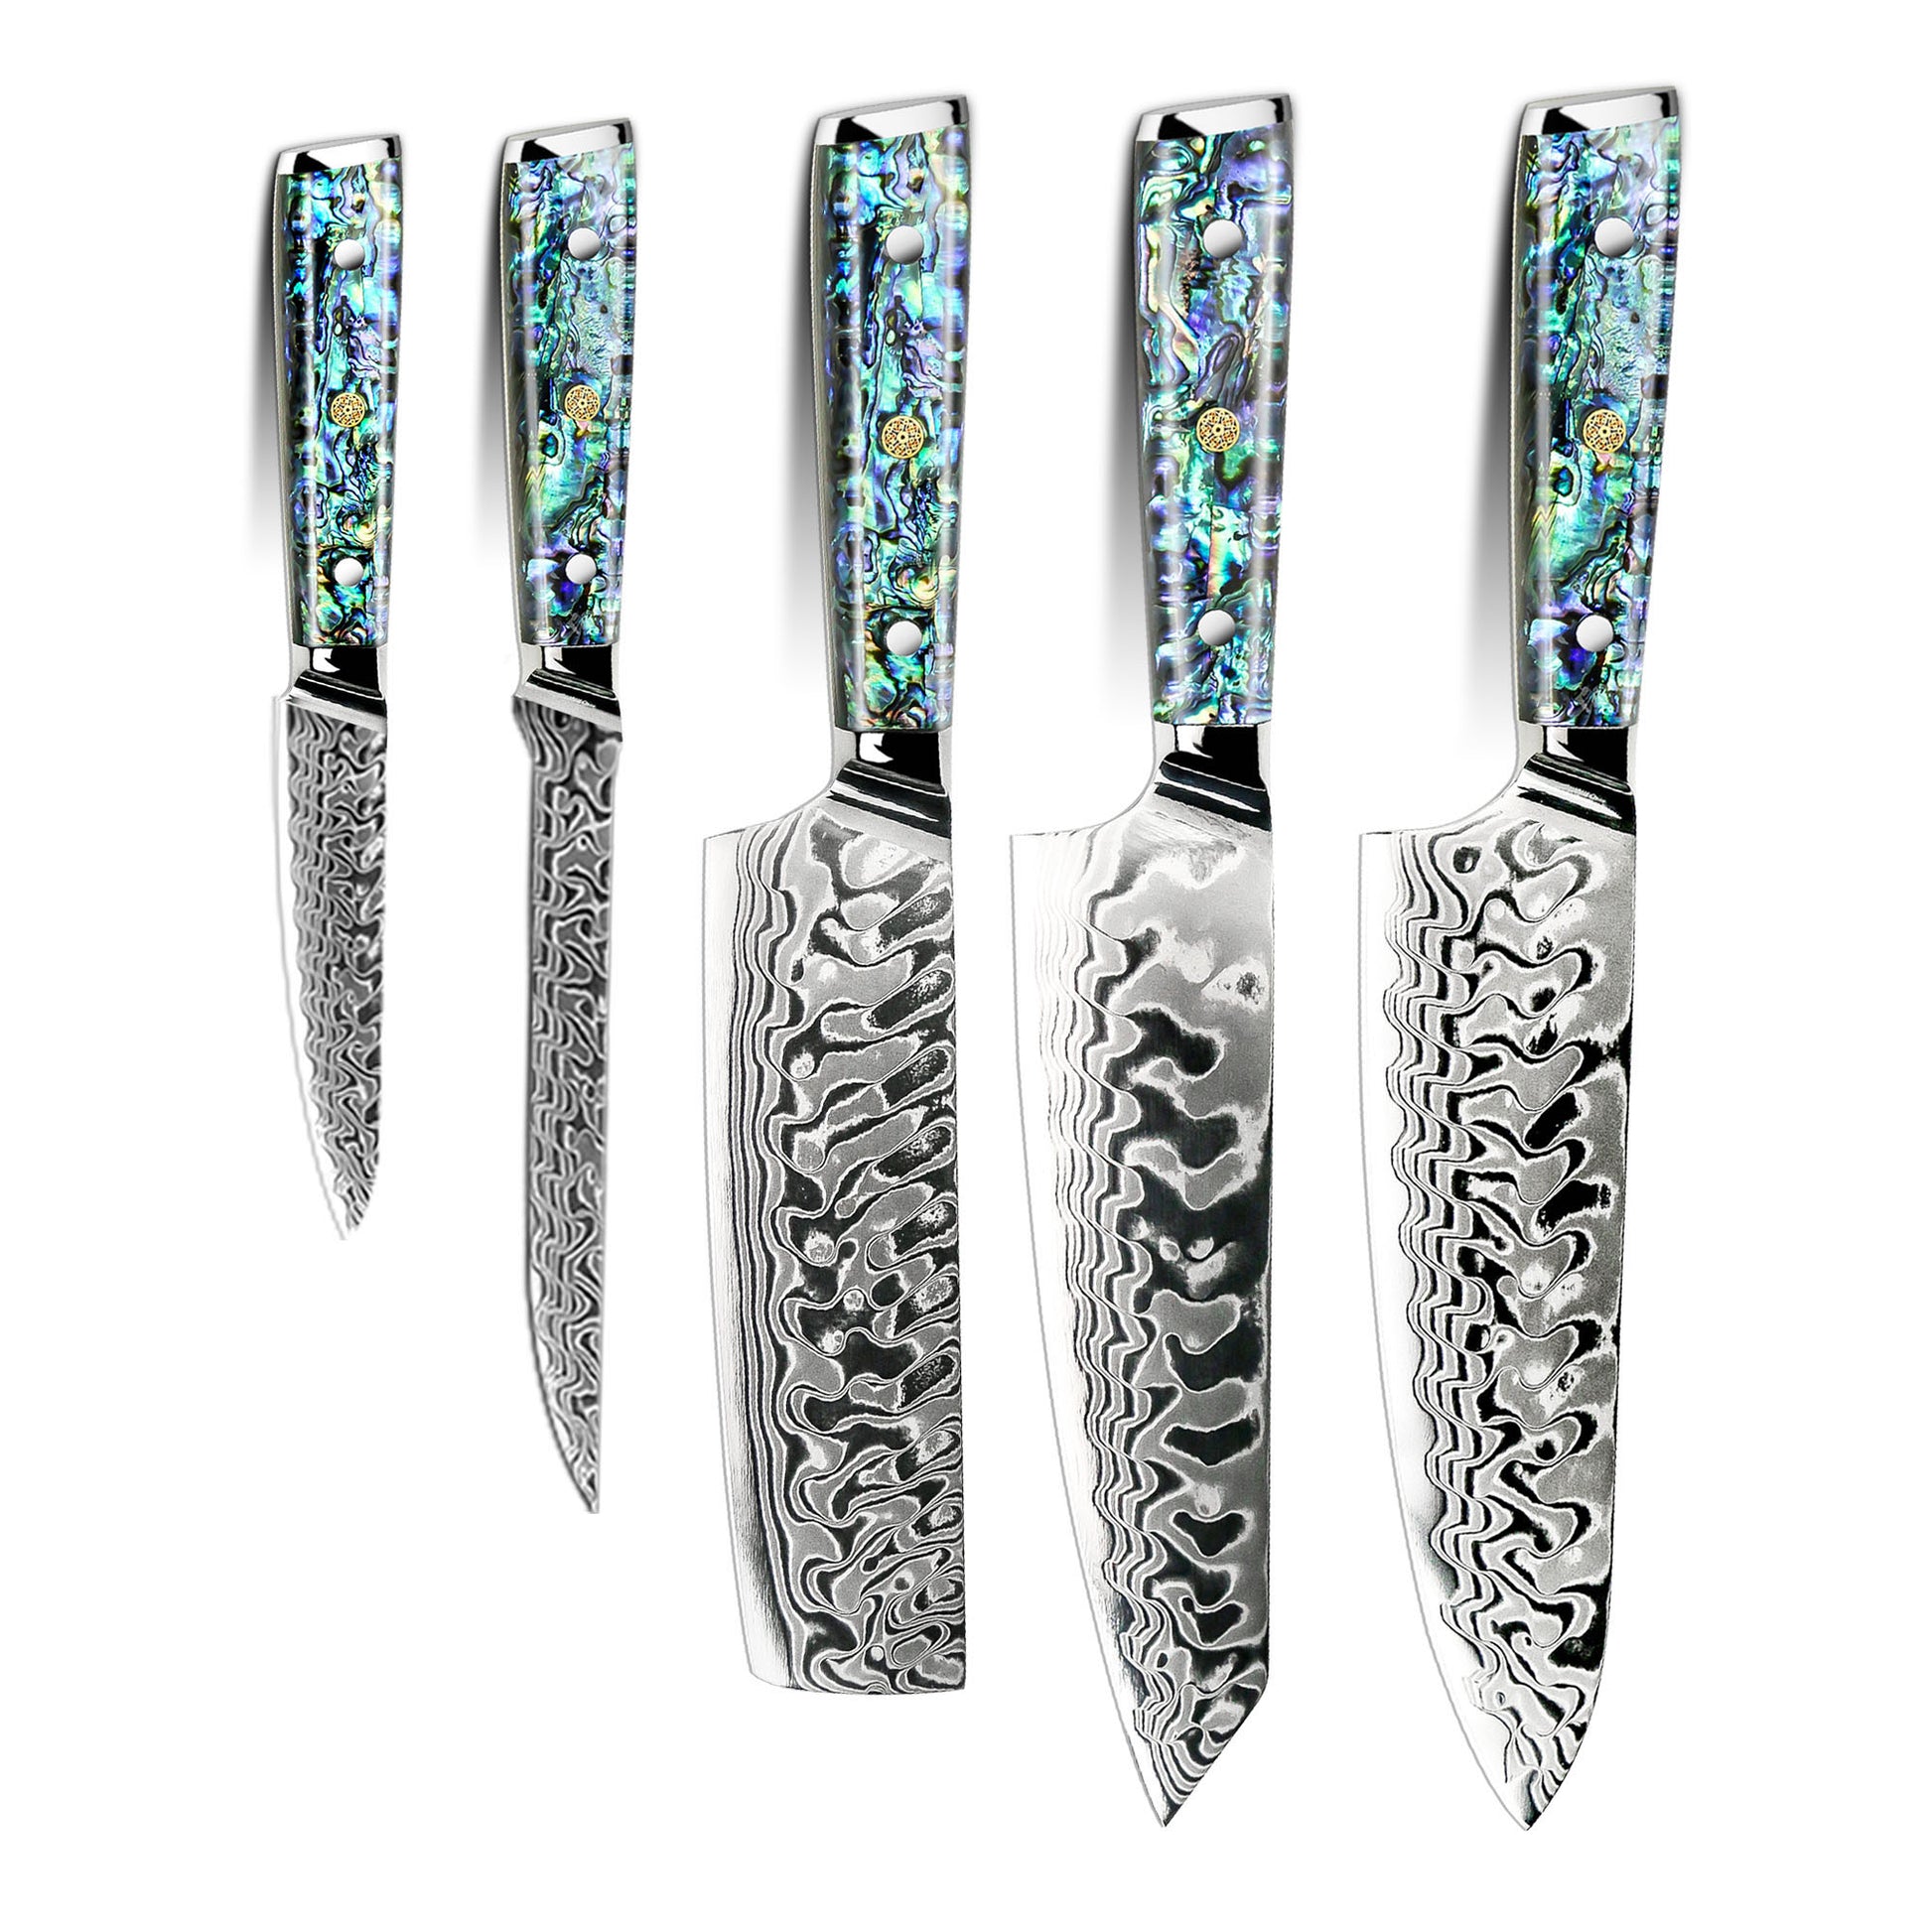 5 Pieces Damascus Japanese Steel Chef Knife Set